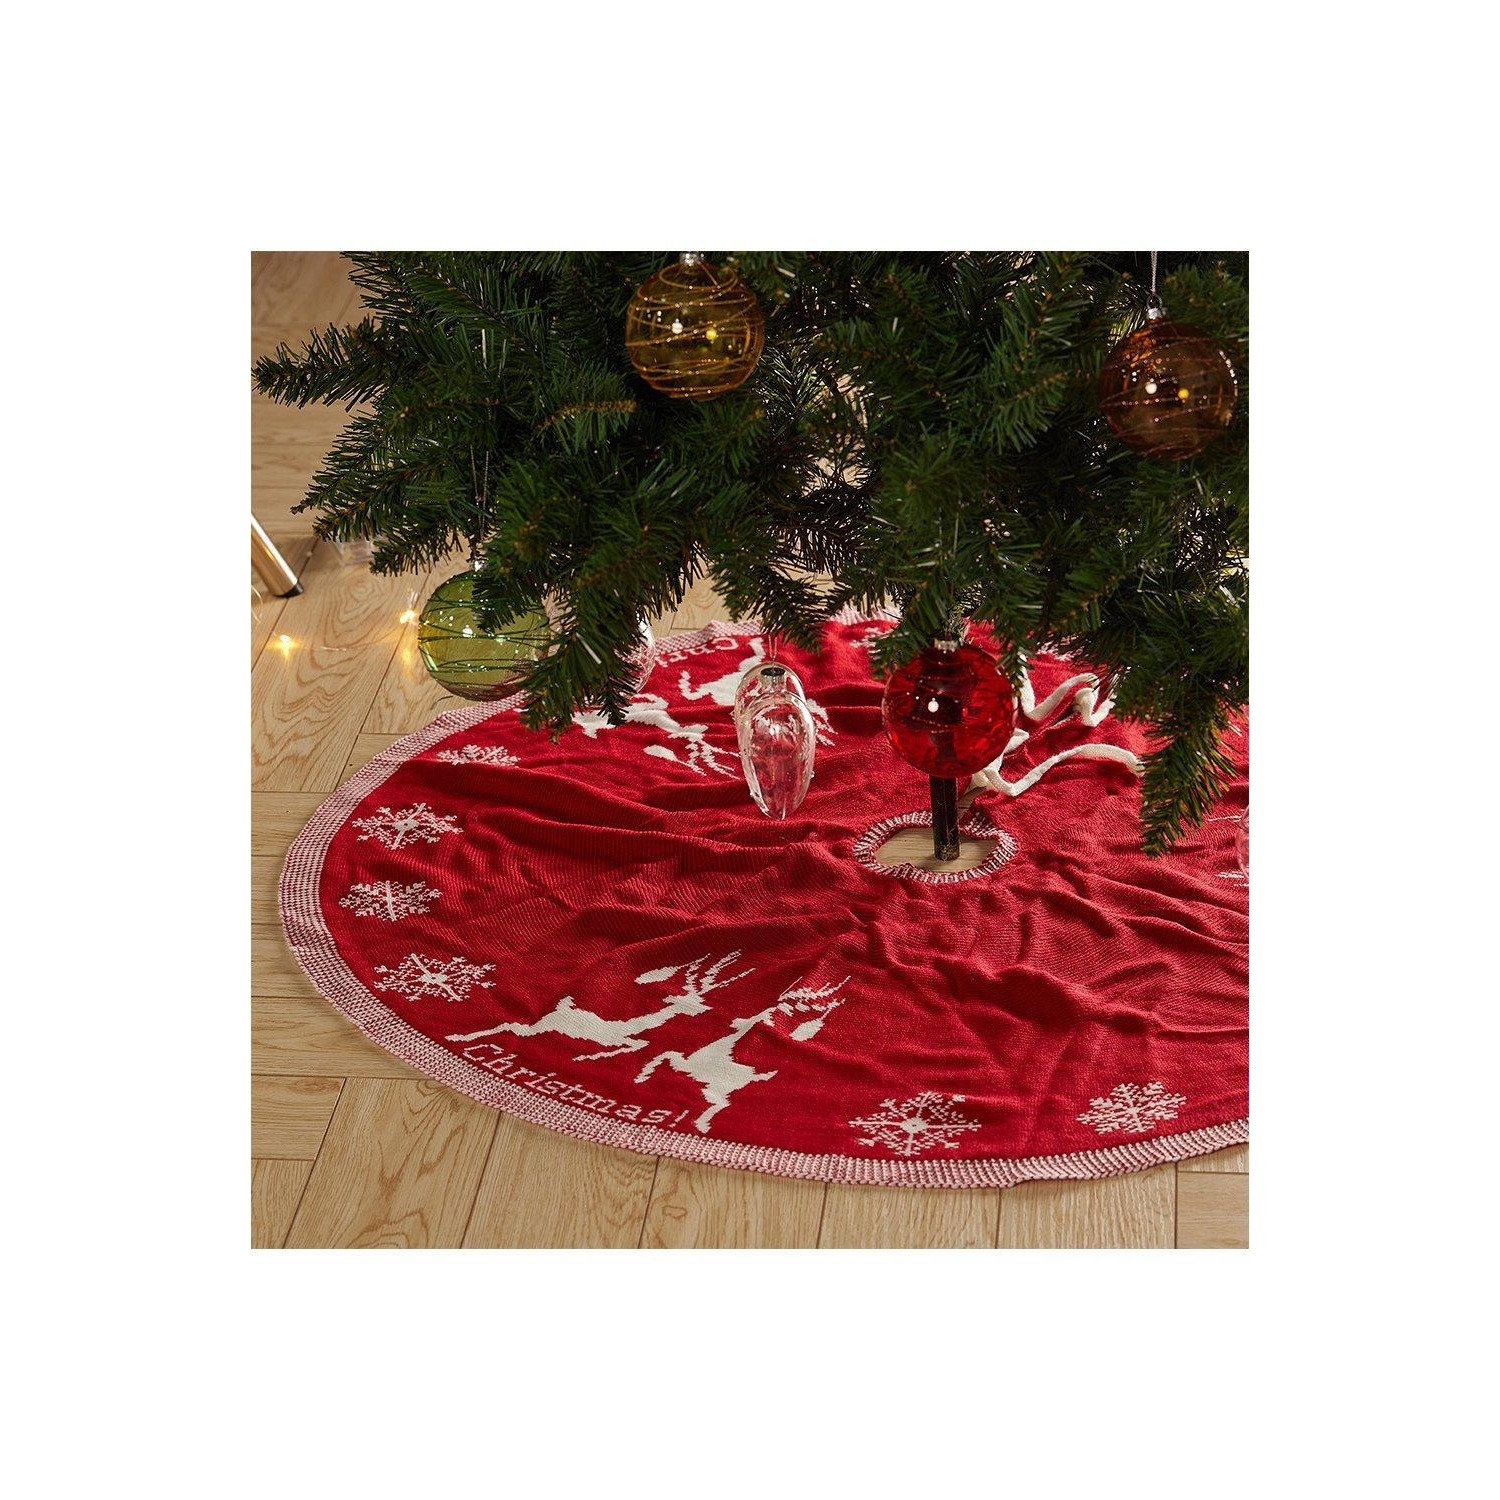 D120cm Rustic Knitted Double-Sided Christmas Tree Skirt with Snowflake and Reindeer Decor - image 1